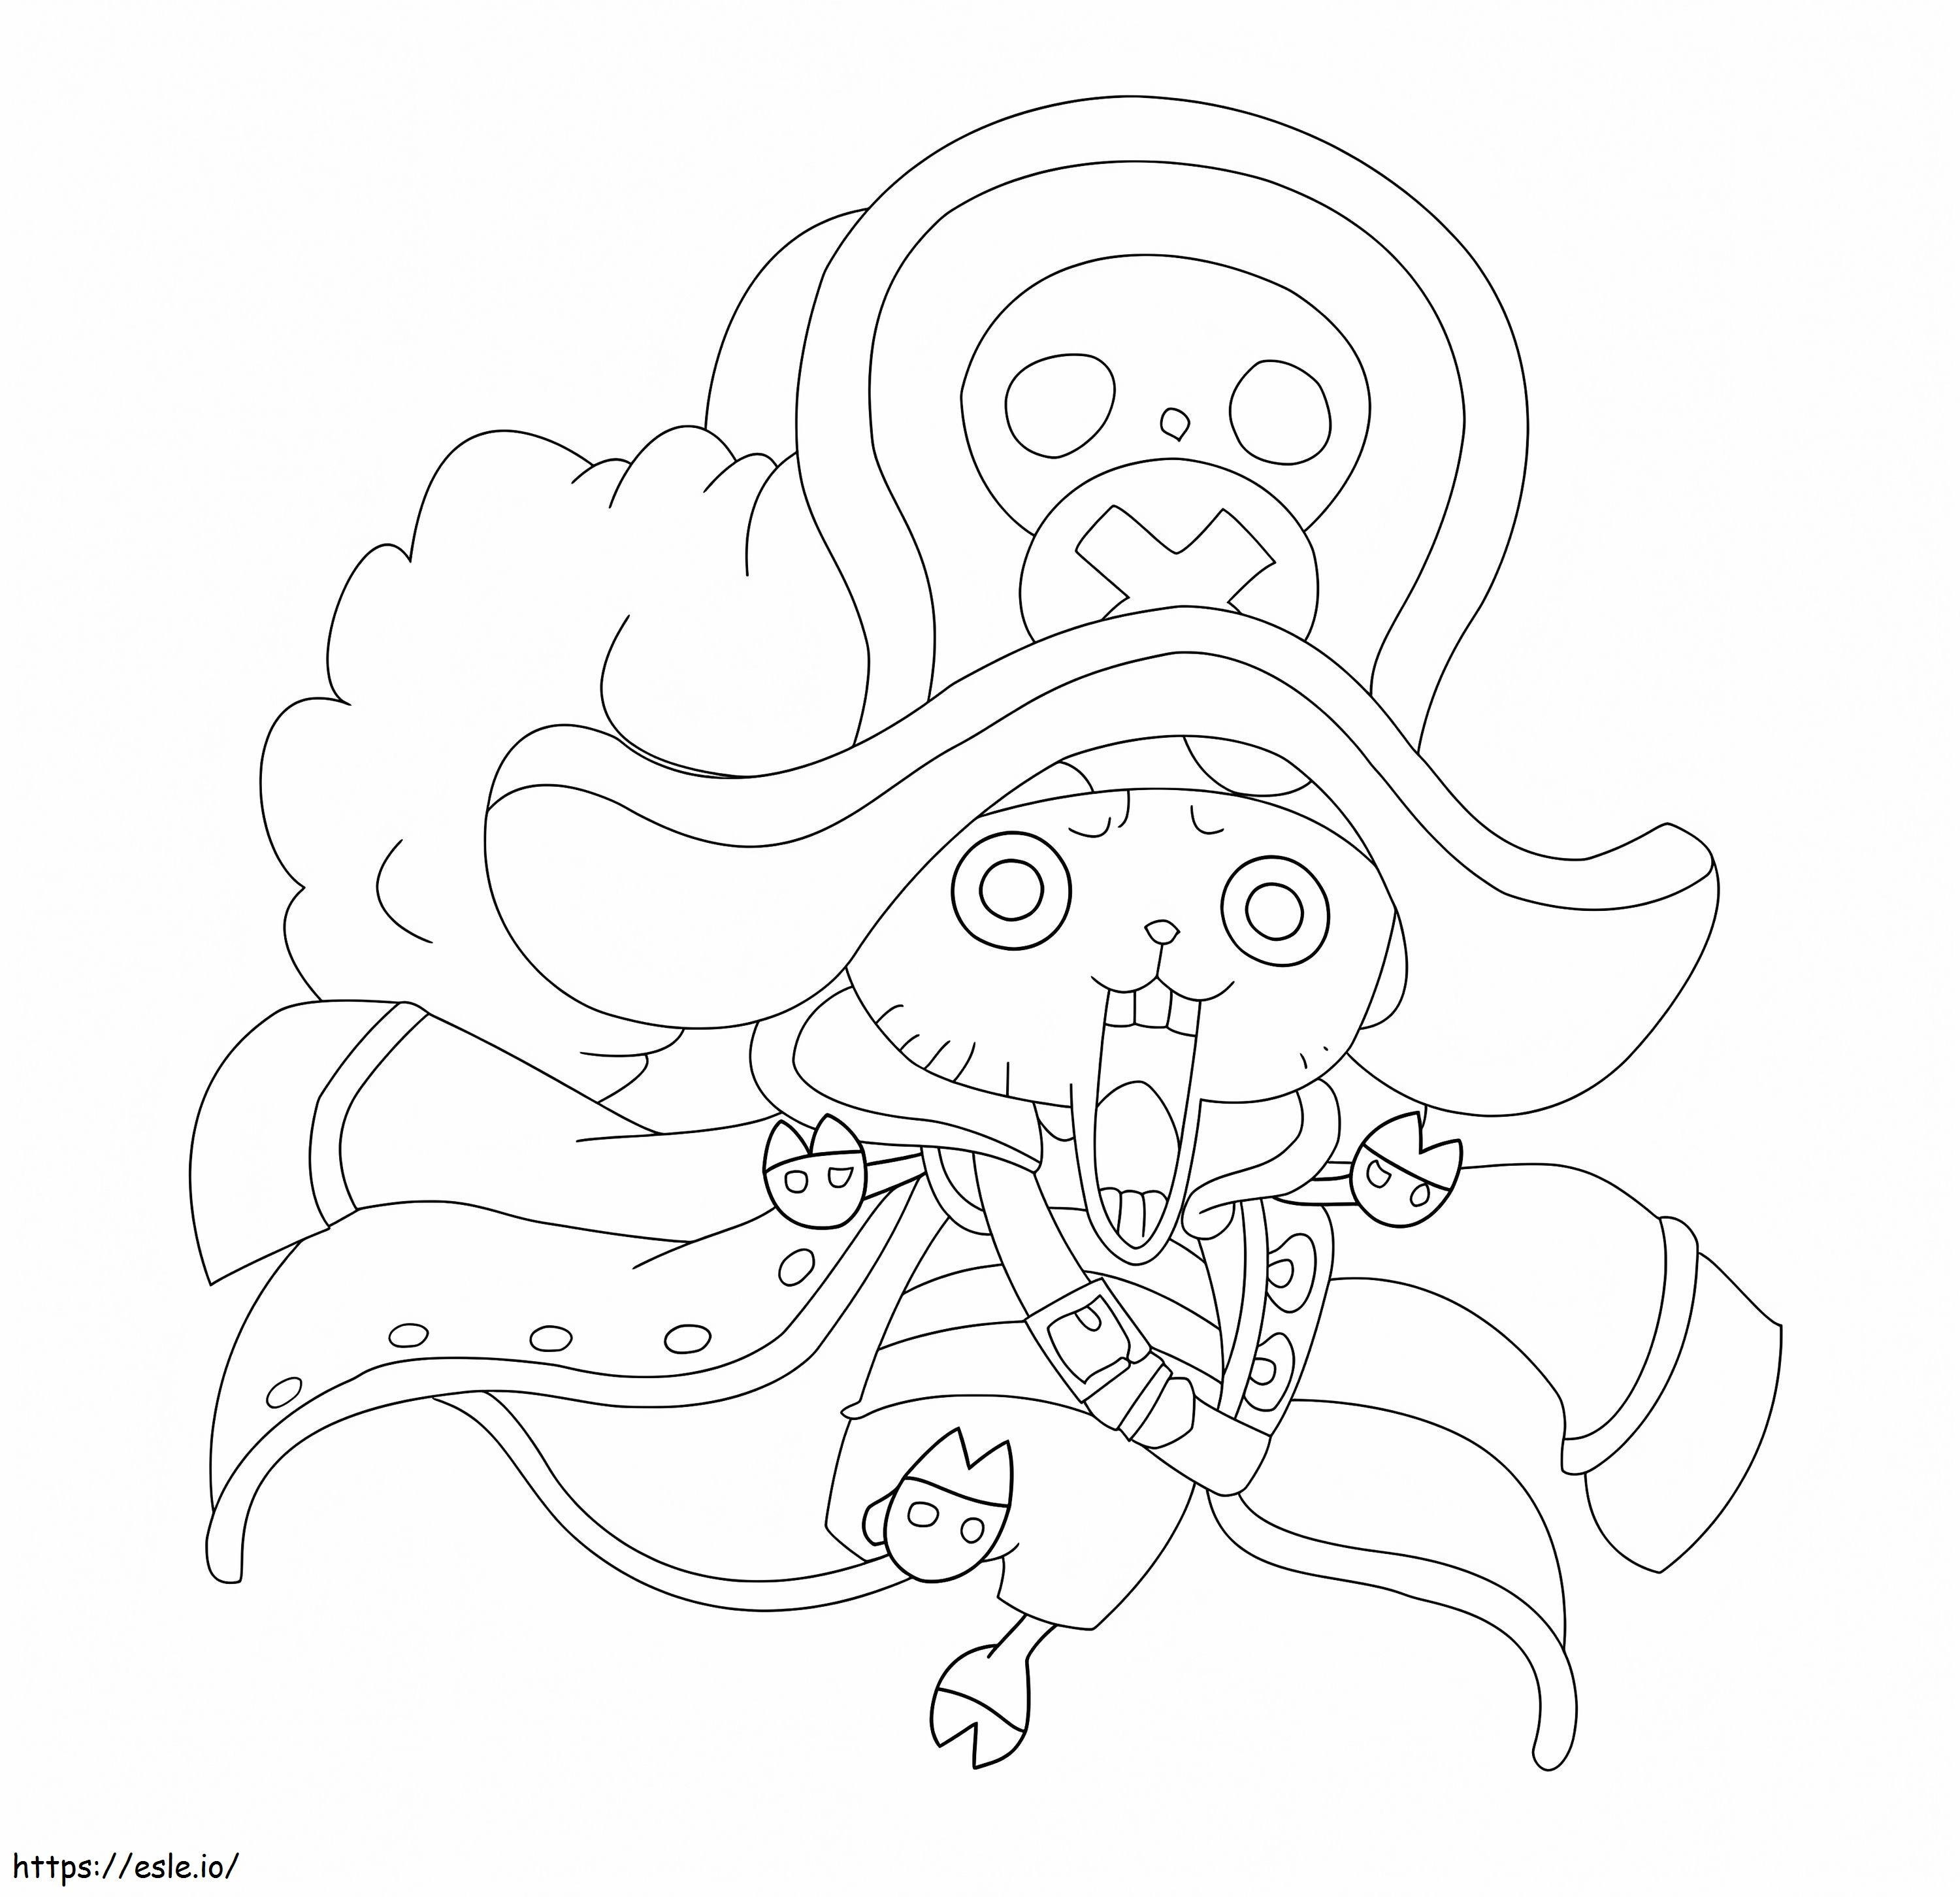 1585642941 794Fb54330D168Dcaf8F15545B918A12 coloring page